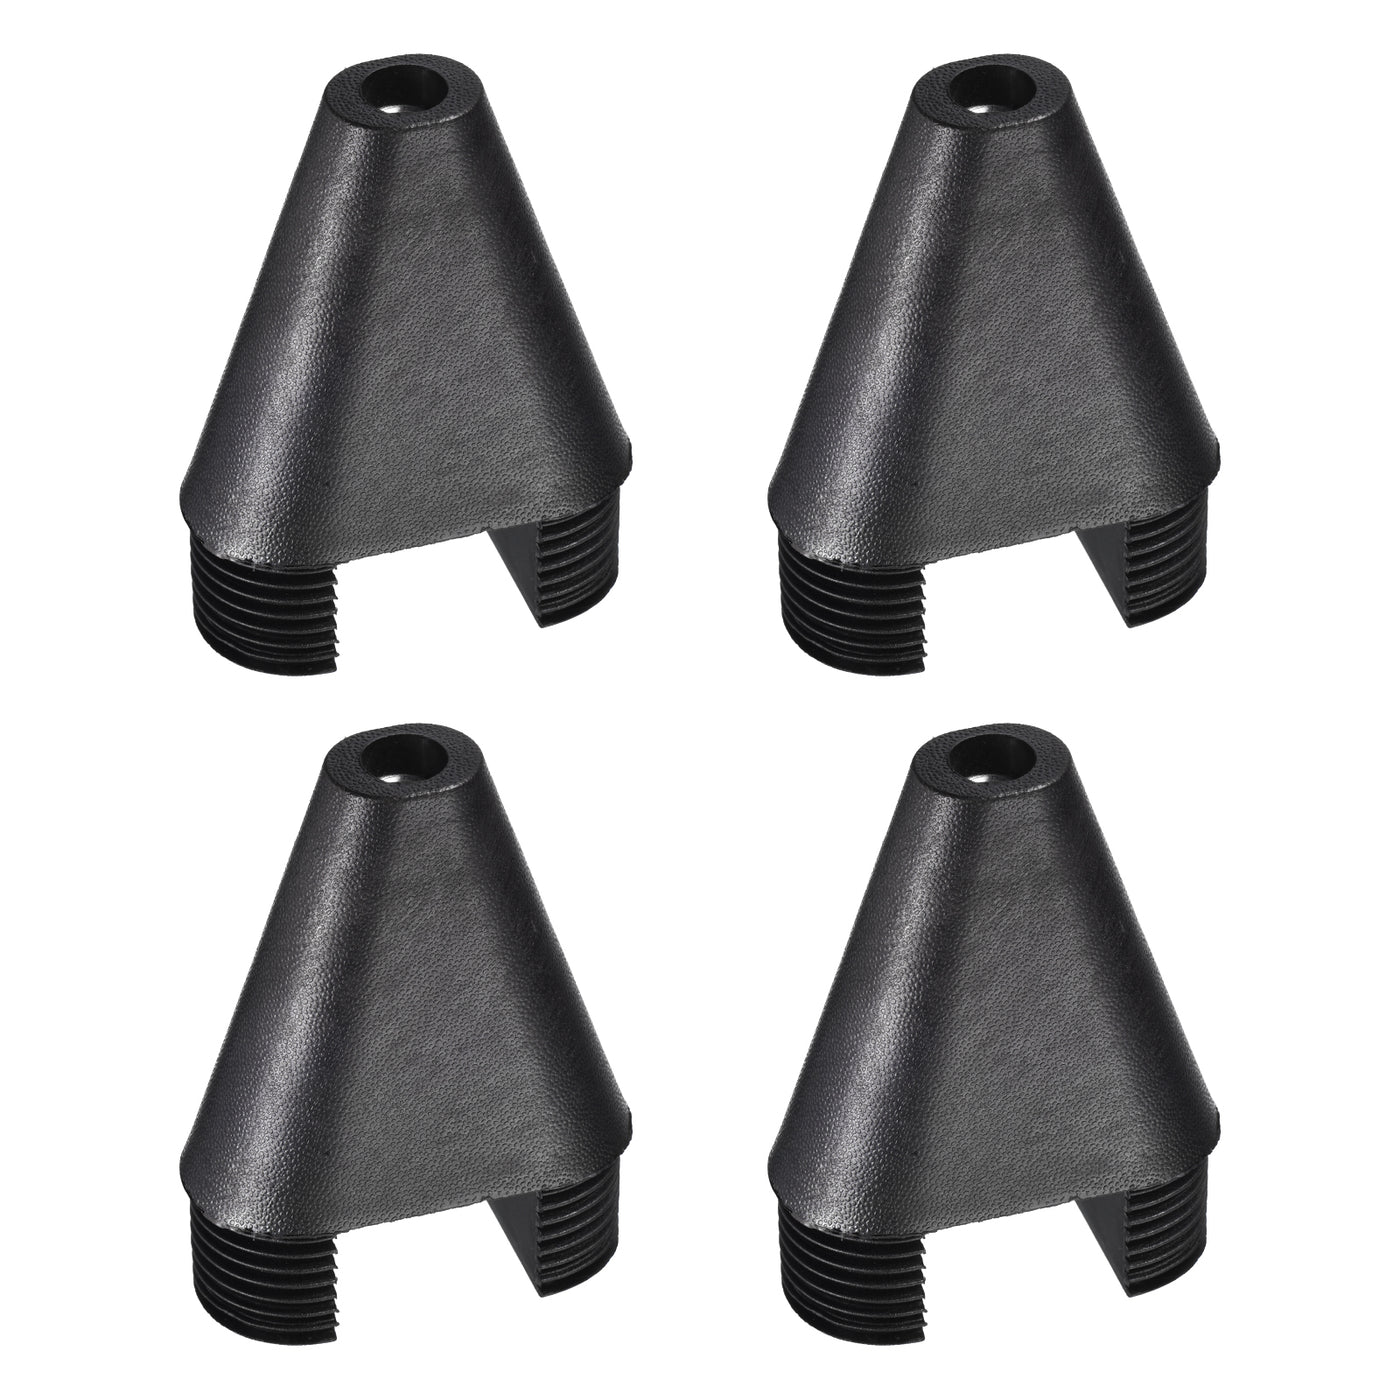 uxcell Uxcell 4Pcs 2.36"x1.18" Caster Insert with Thread, Oval M8 Thread for Furniture